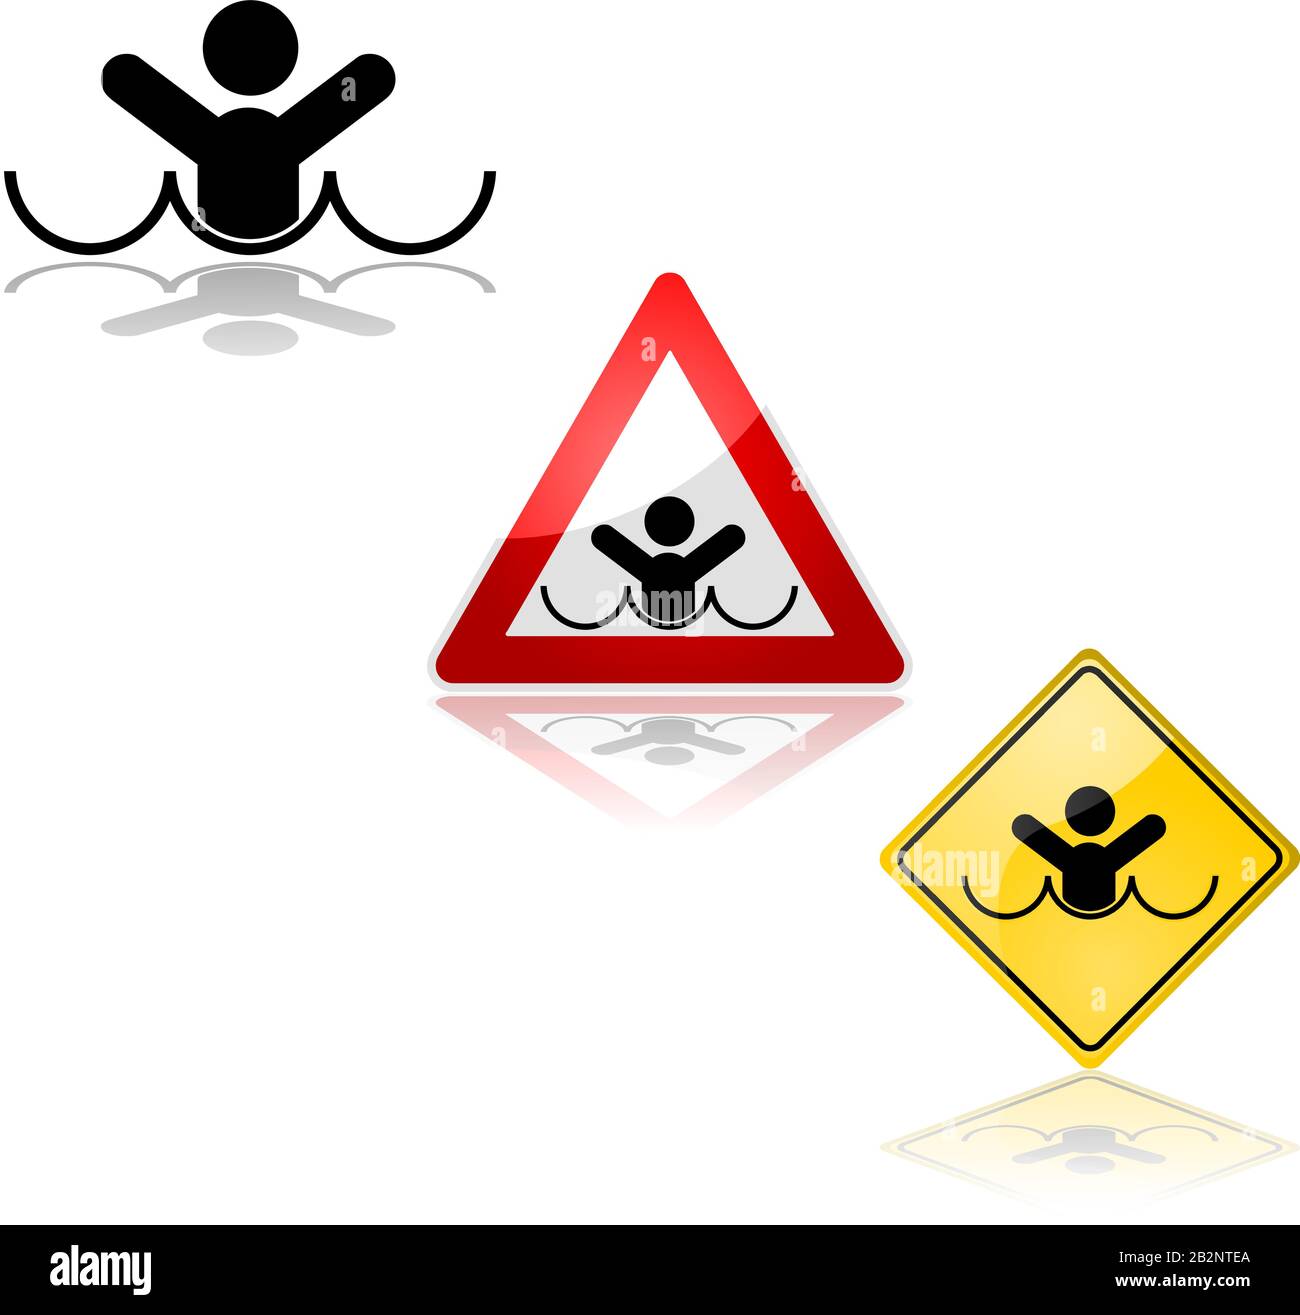 Icon set showing a sign alerting for the risk of drowning Stock Vector